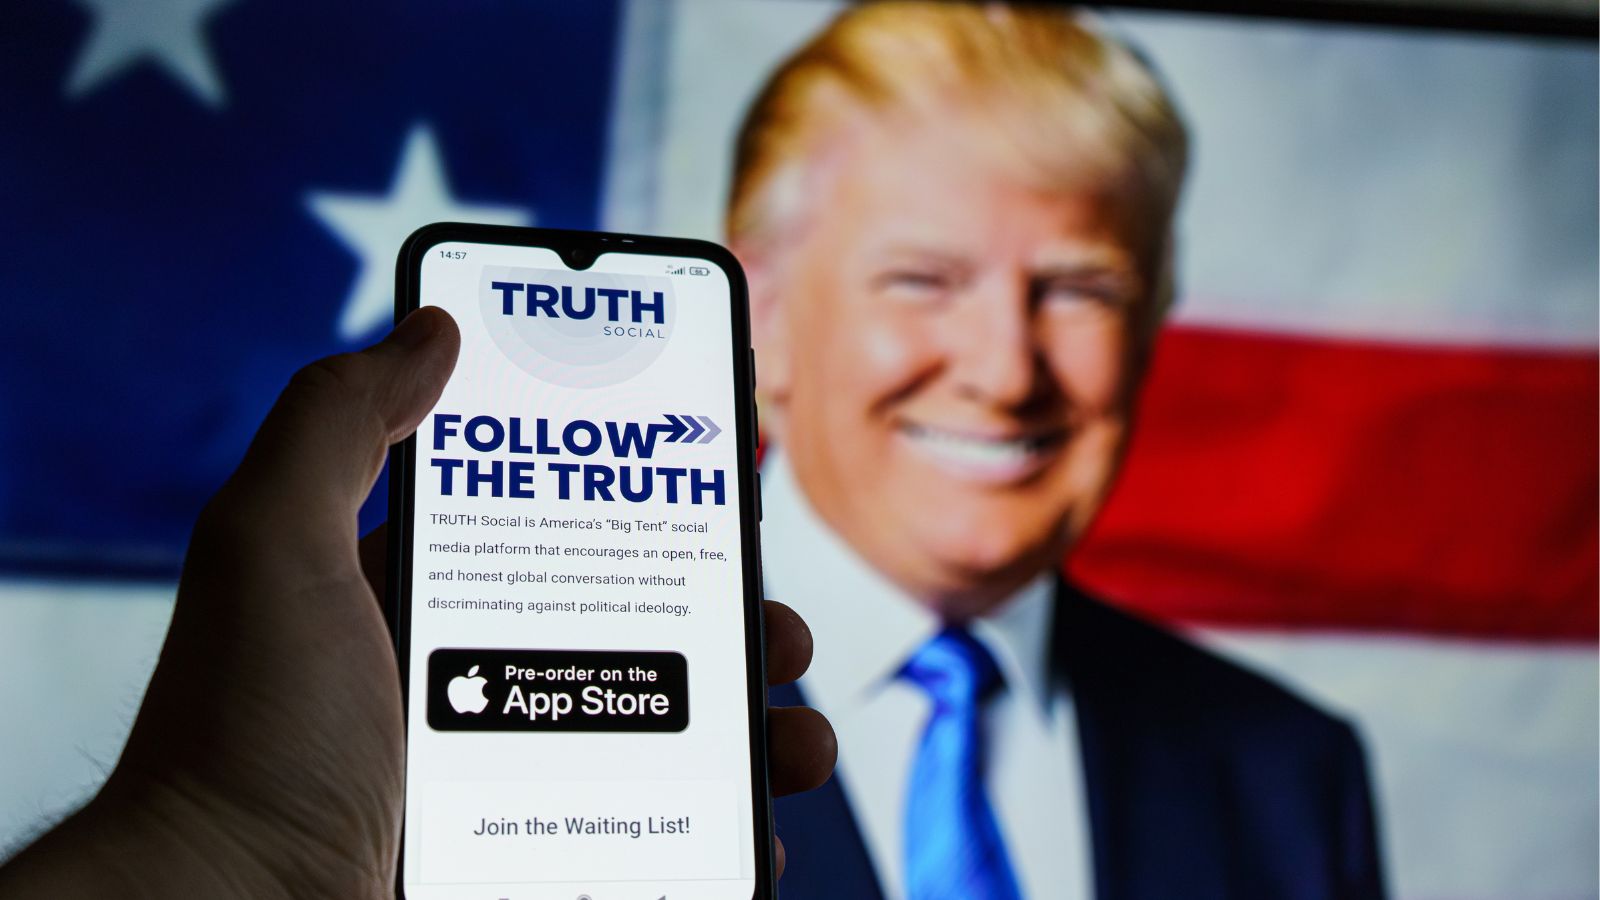 Trump’s Dire Warning on Truth Social: “Country Will Die” Under Another Biden Term